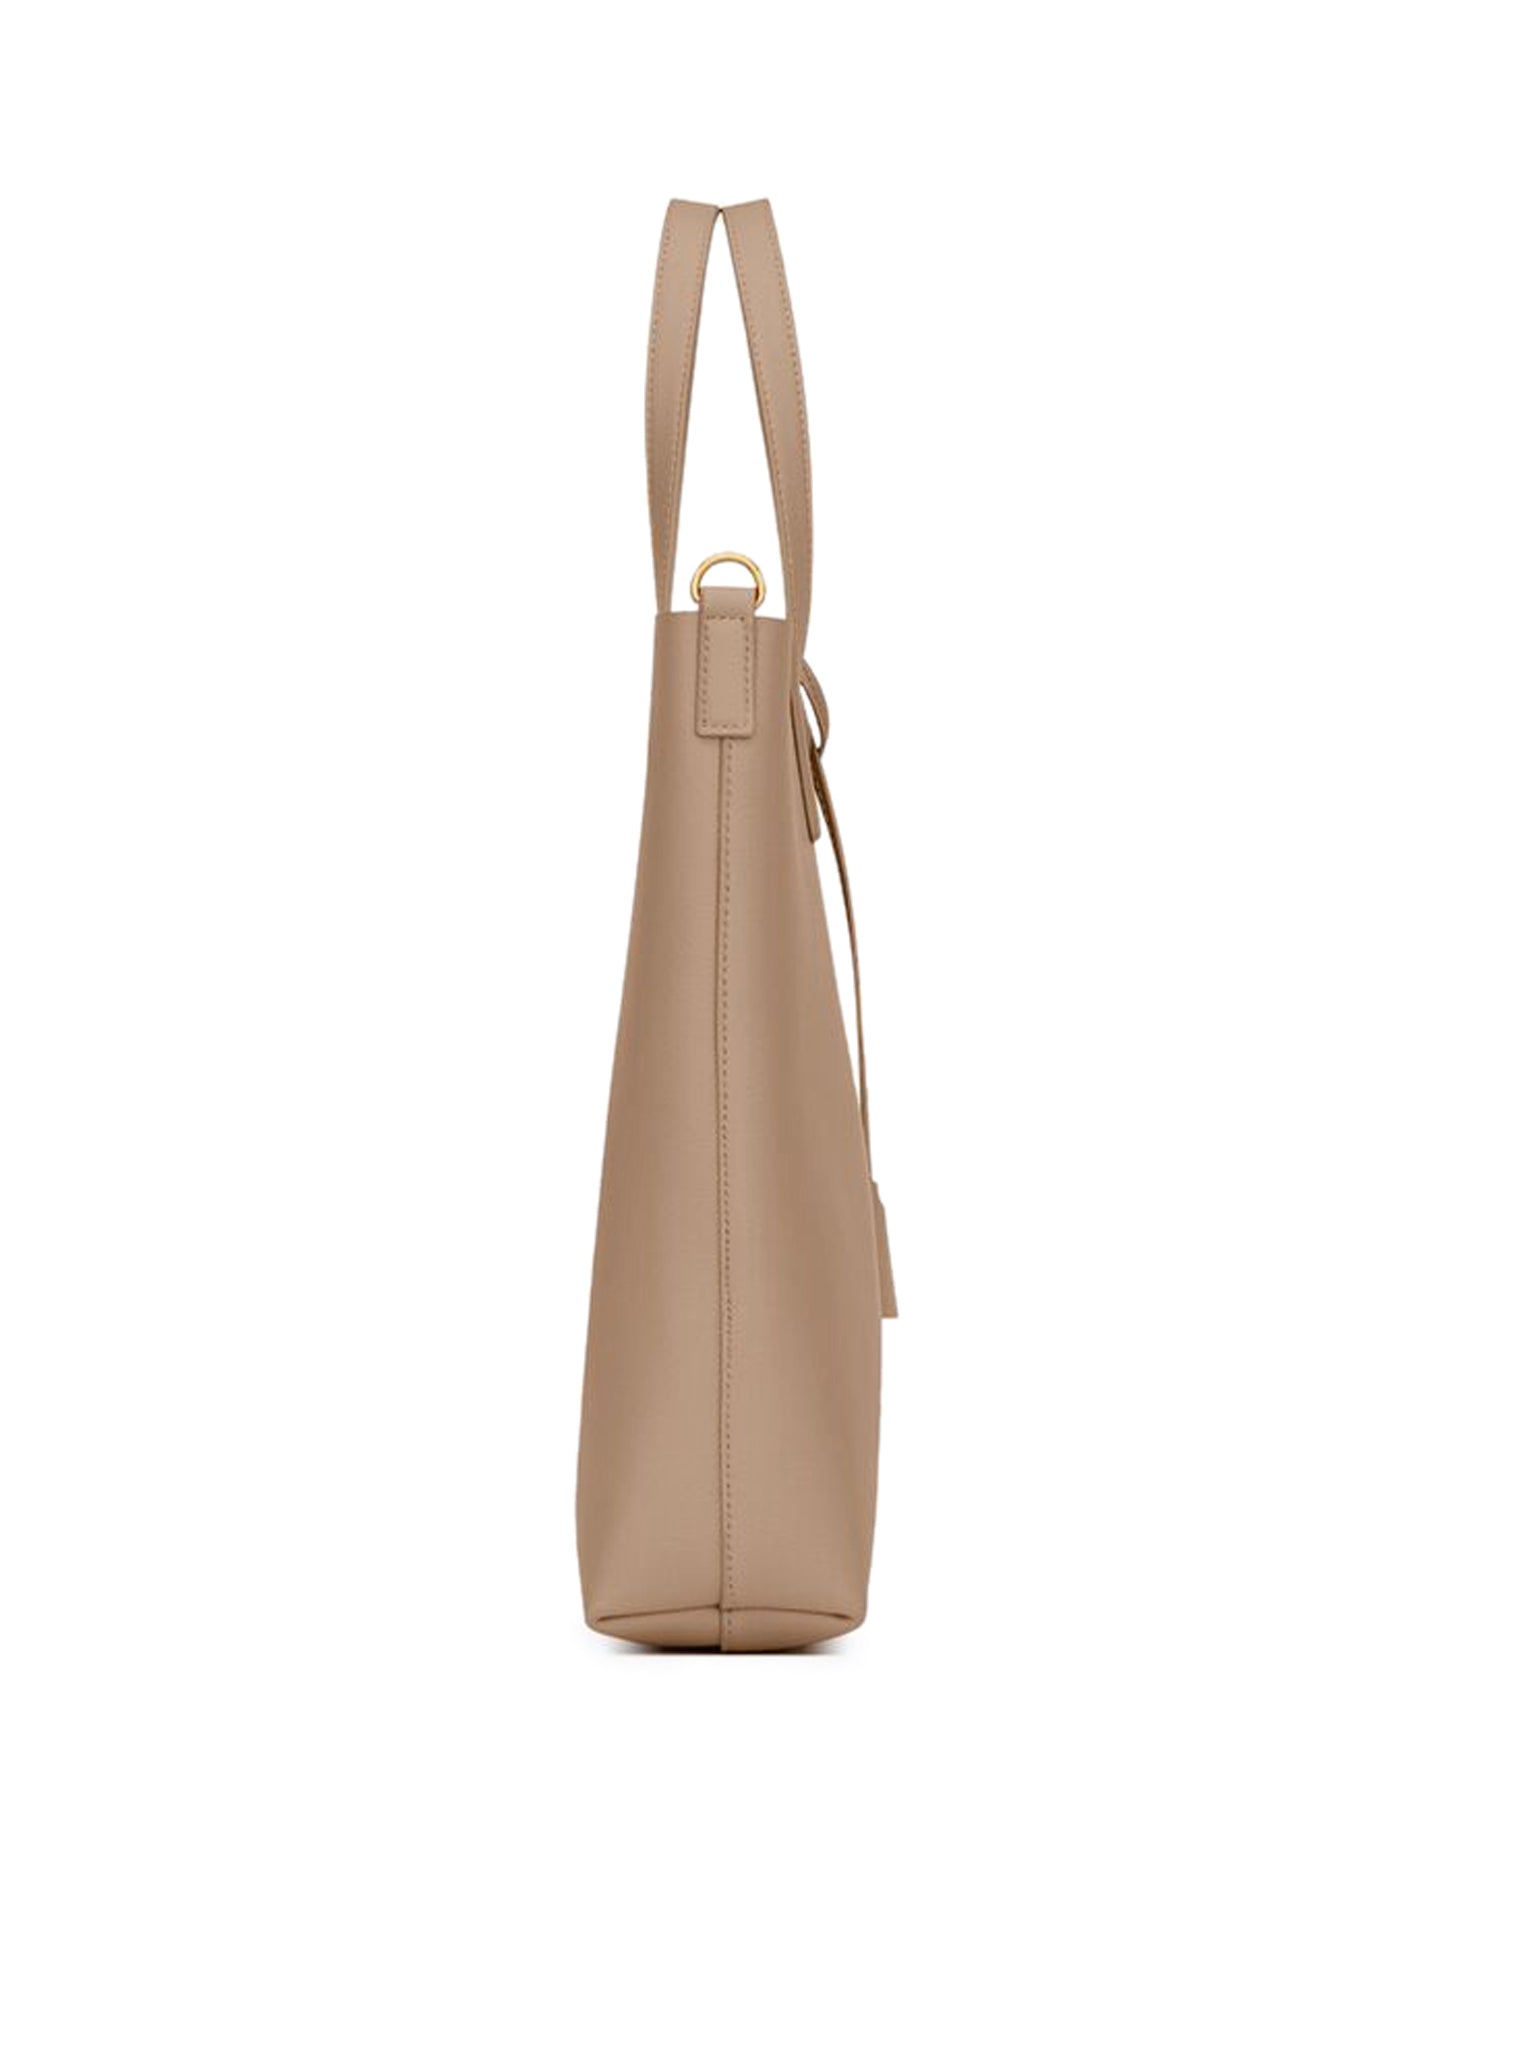 Saint Laurent Shopping Leather Tote Bag in Natural